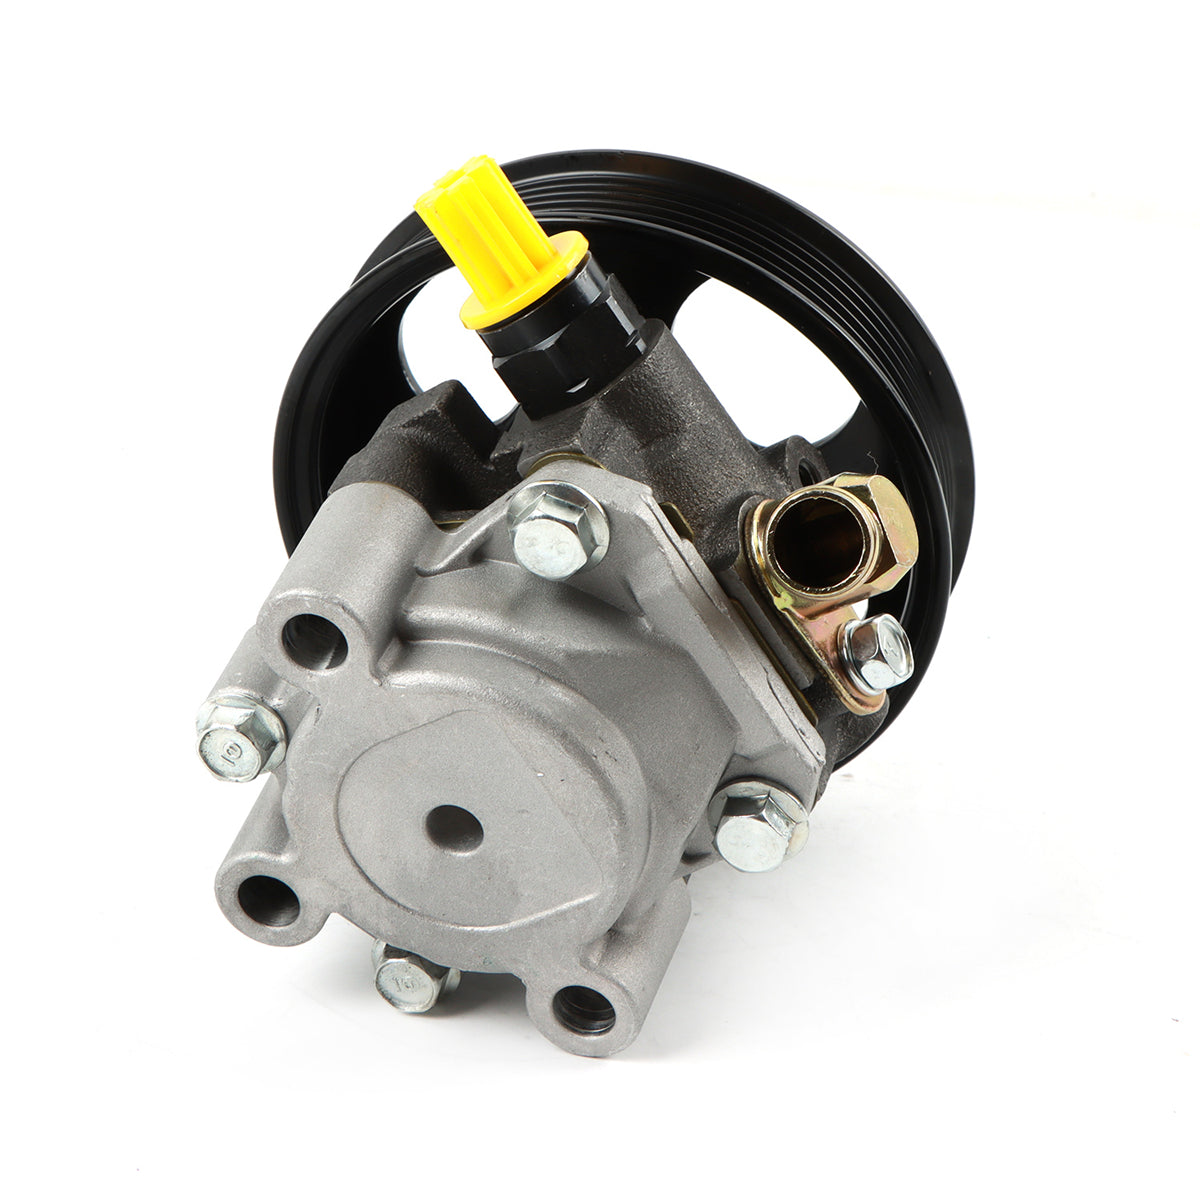 Daysyore® Power Steering Pump w/ Pulley 21-5264 for 2000-2007 Toyota Sequoia Tundra V8 4.7L